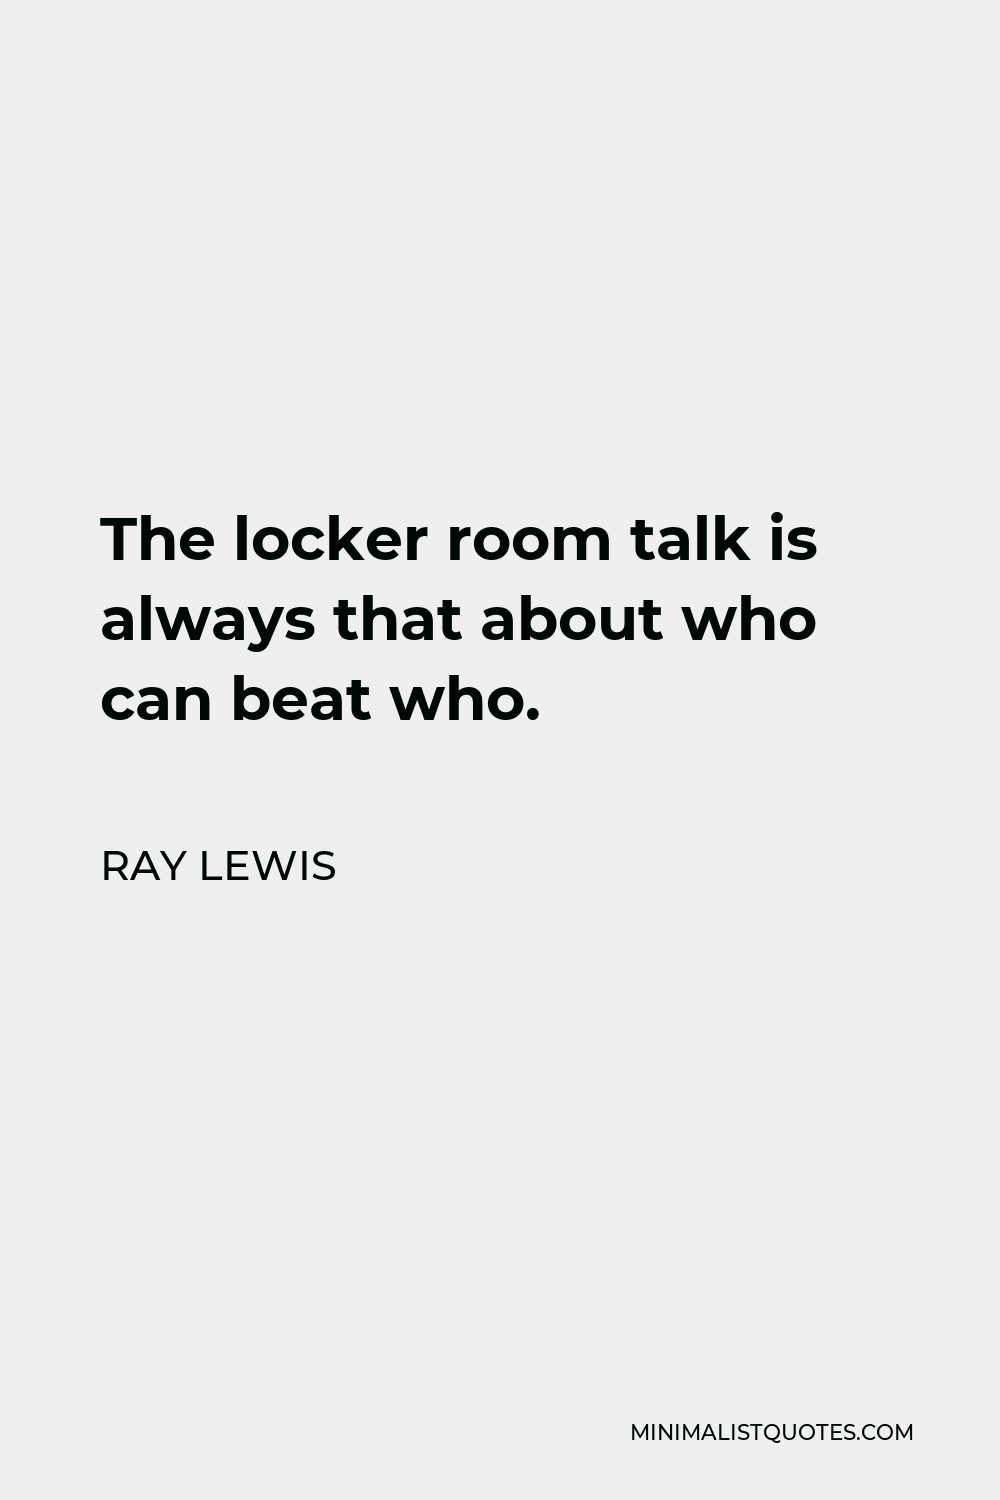 Ray Lewis Quote - The locker room talk is always that about who can beat who.